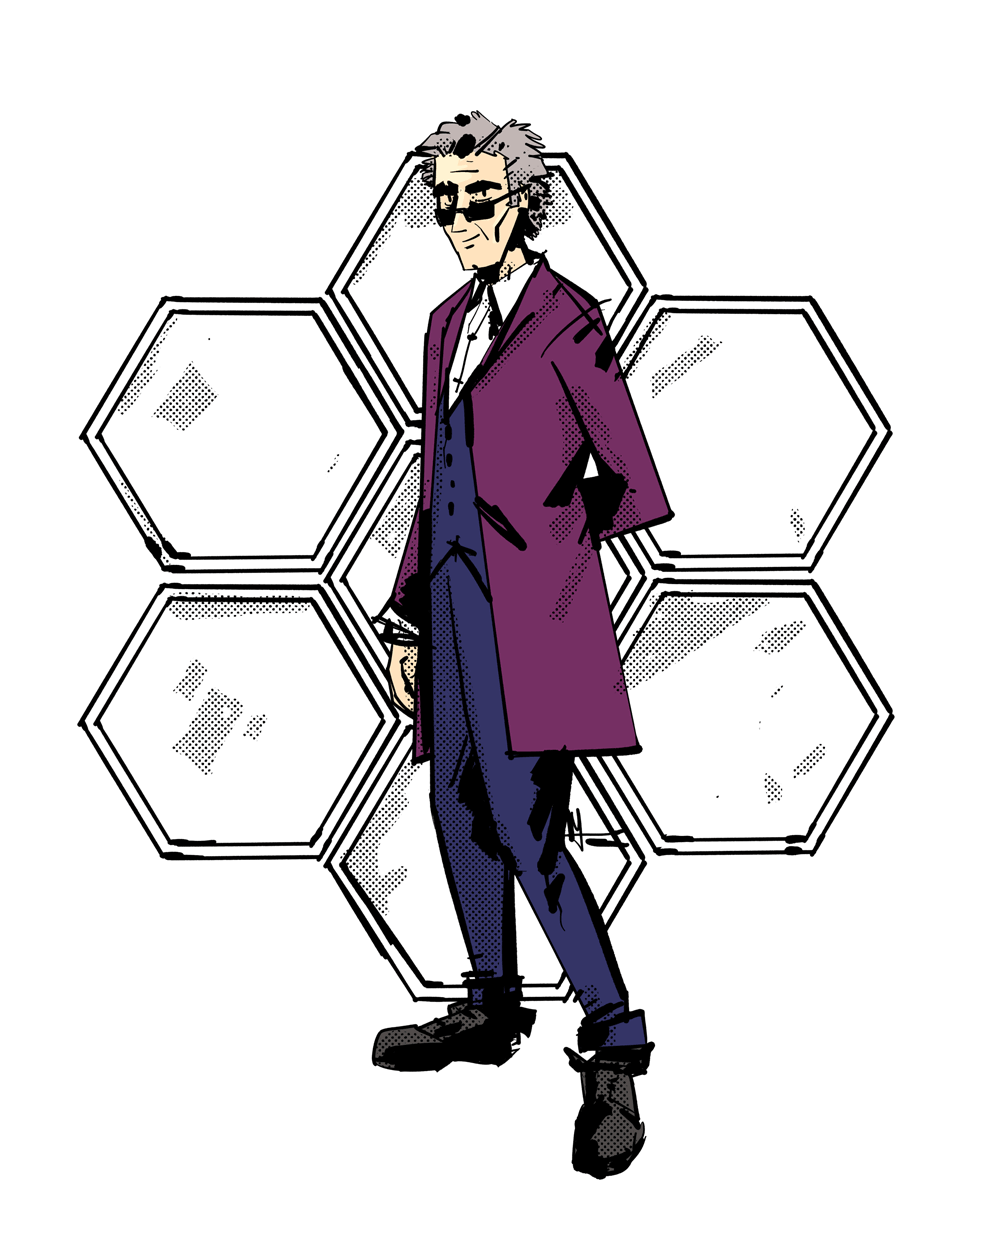 The Twelth Doctor, played by Peter Capaldi, is wearing a purple velvet jacket and a dark purple suit. His hair is large and puffy and he's looking over his sunglasses at us.